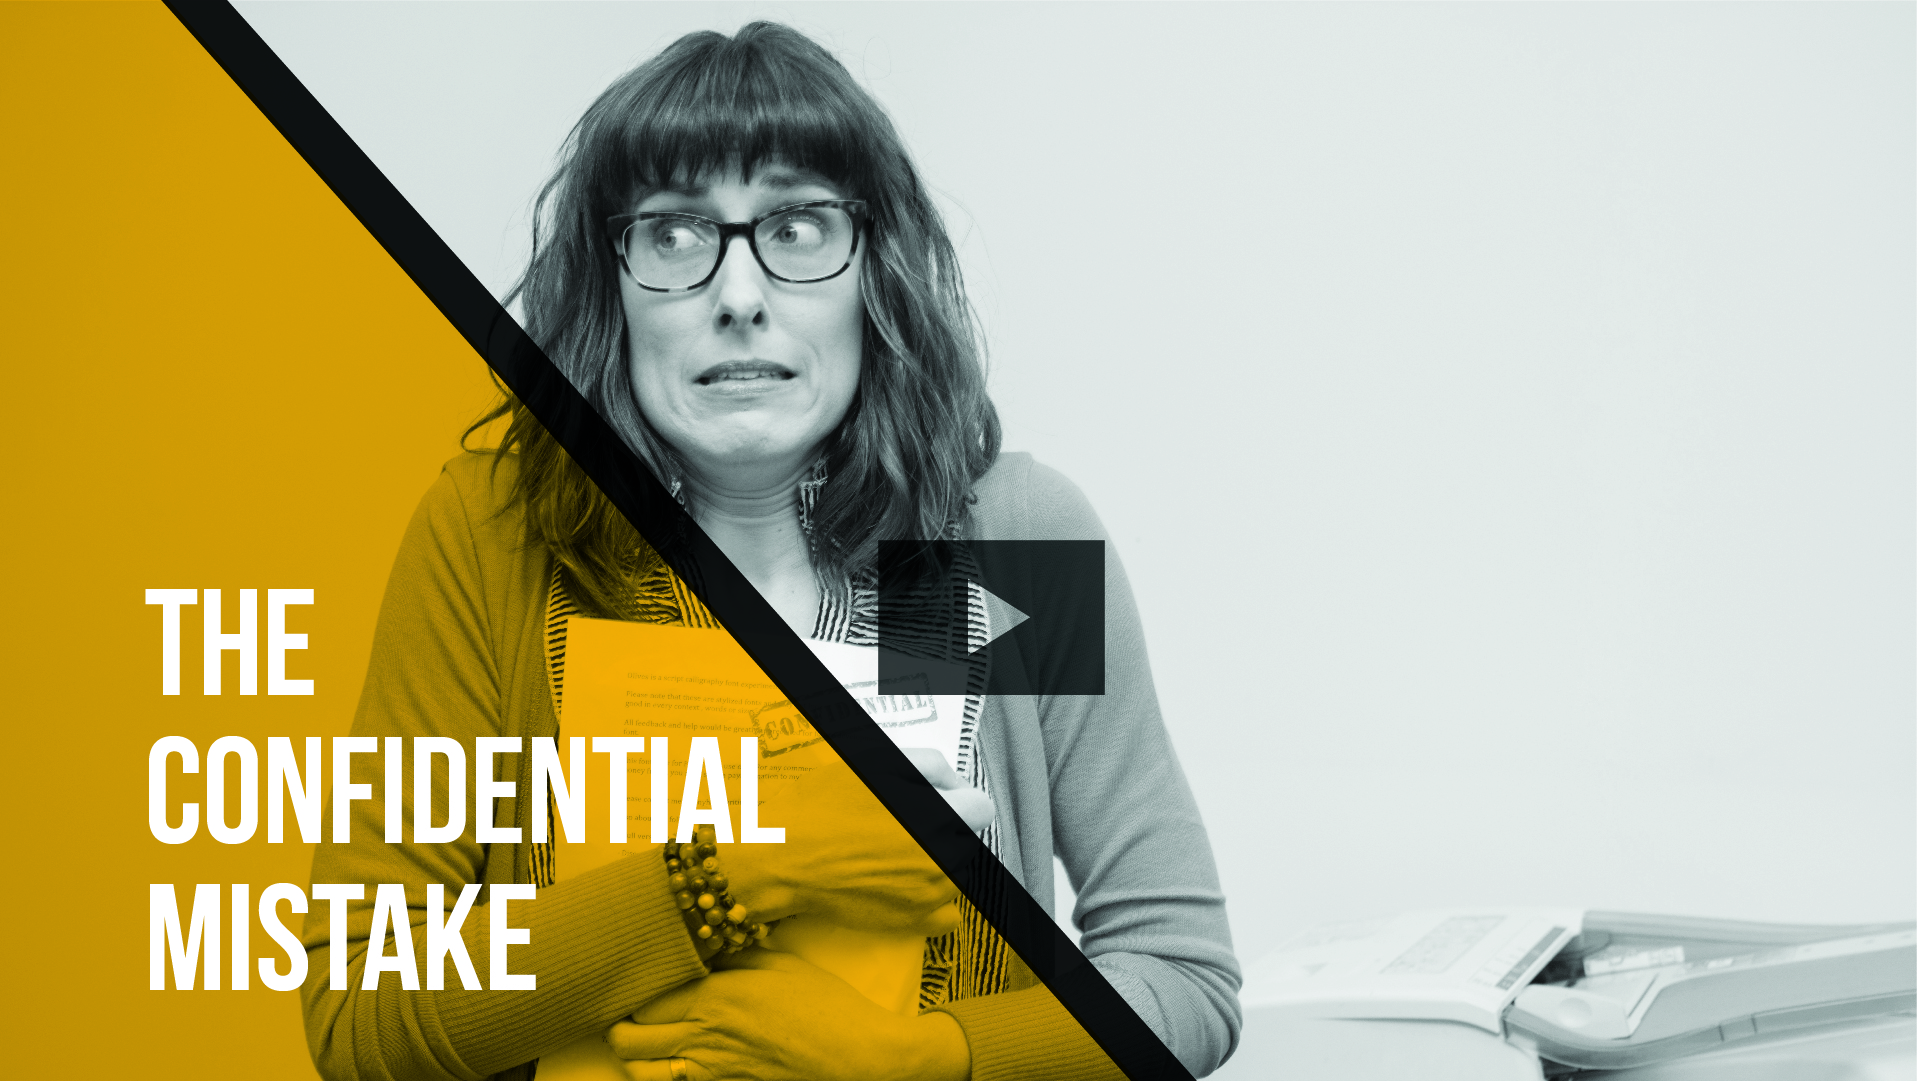 Don't Limit Linda: Confidential Printing [Video]